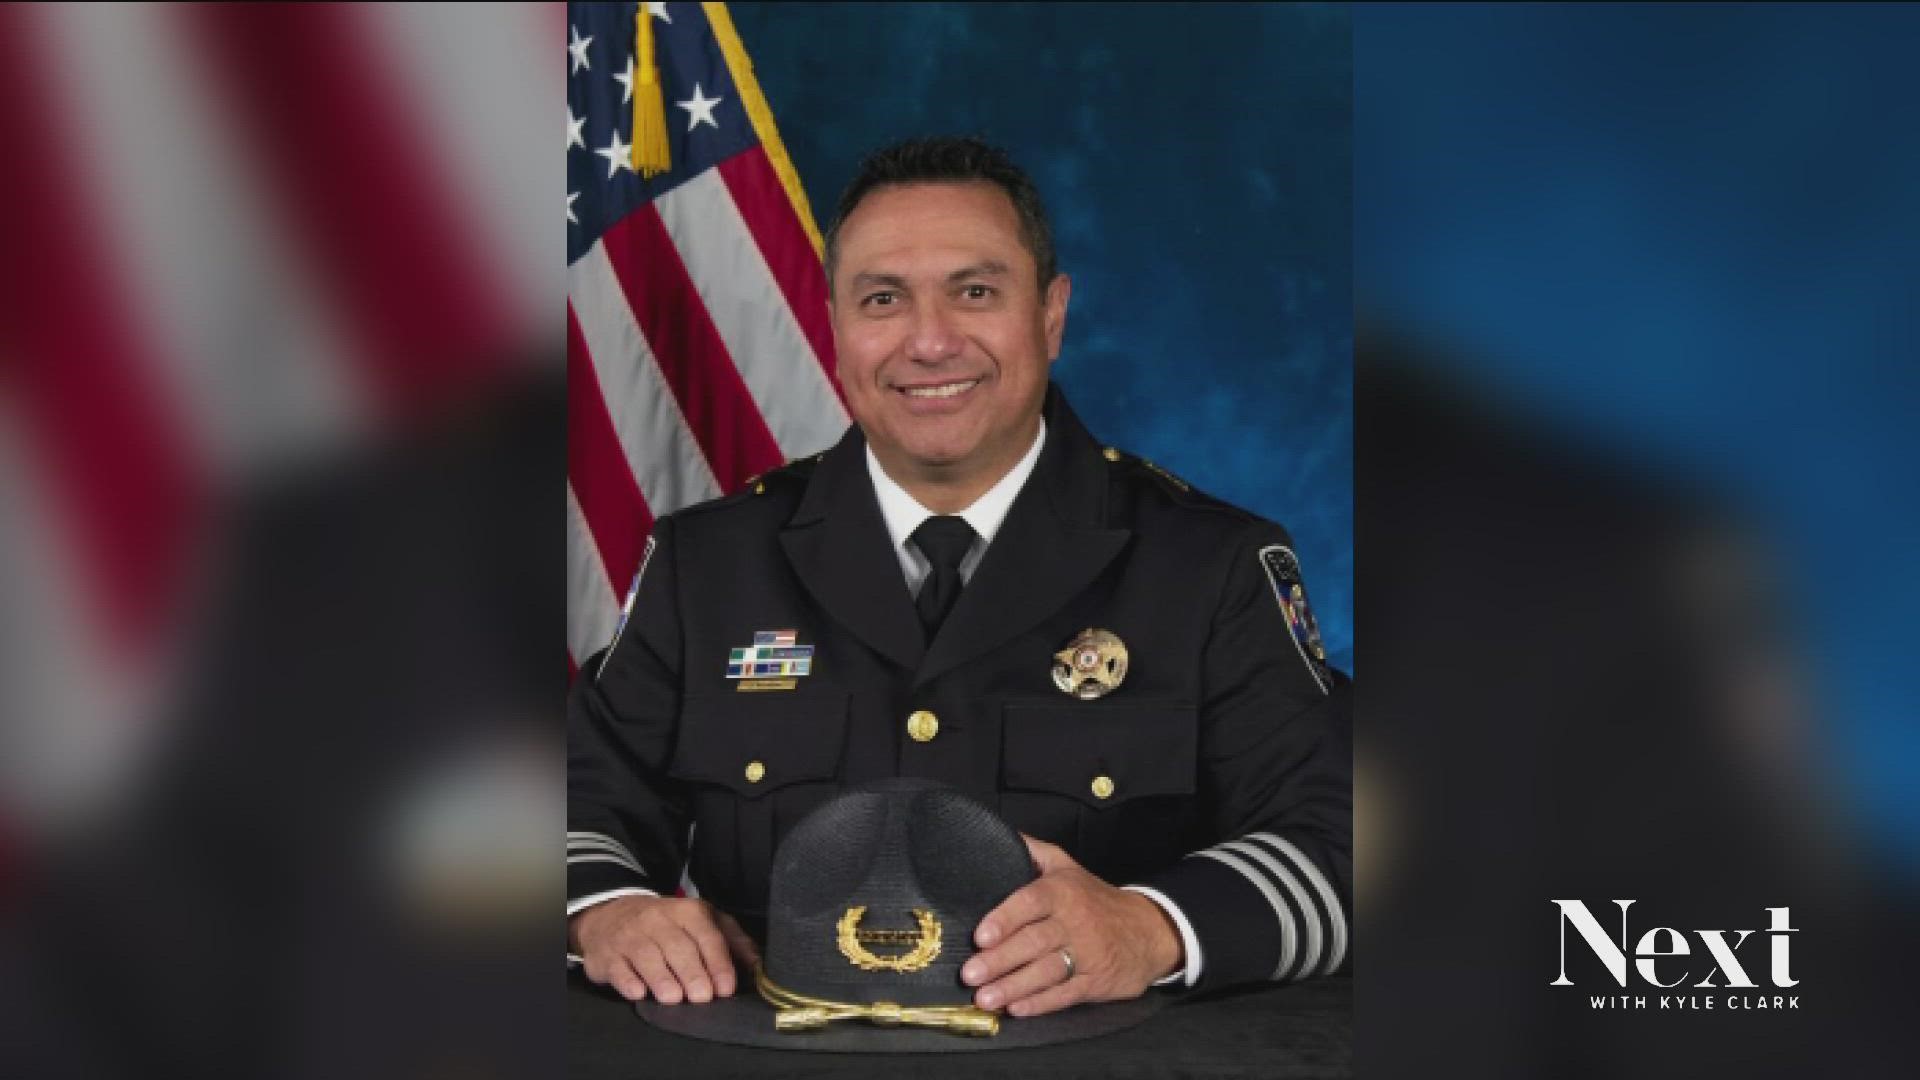 Undersheriff Joe Roybal won the primary to be on the November ballot. A complaint said he allowed a shooting range owner to give discounts in exchange for names.